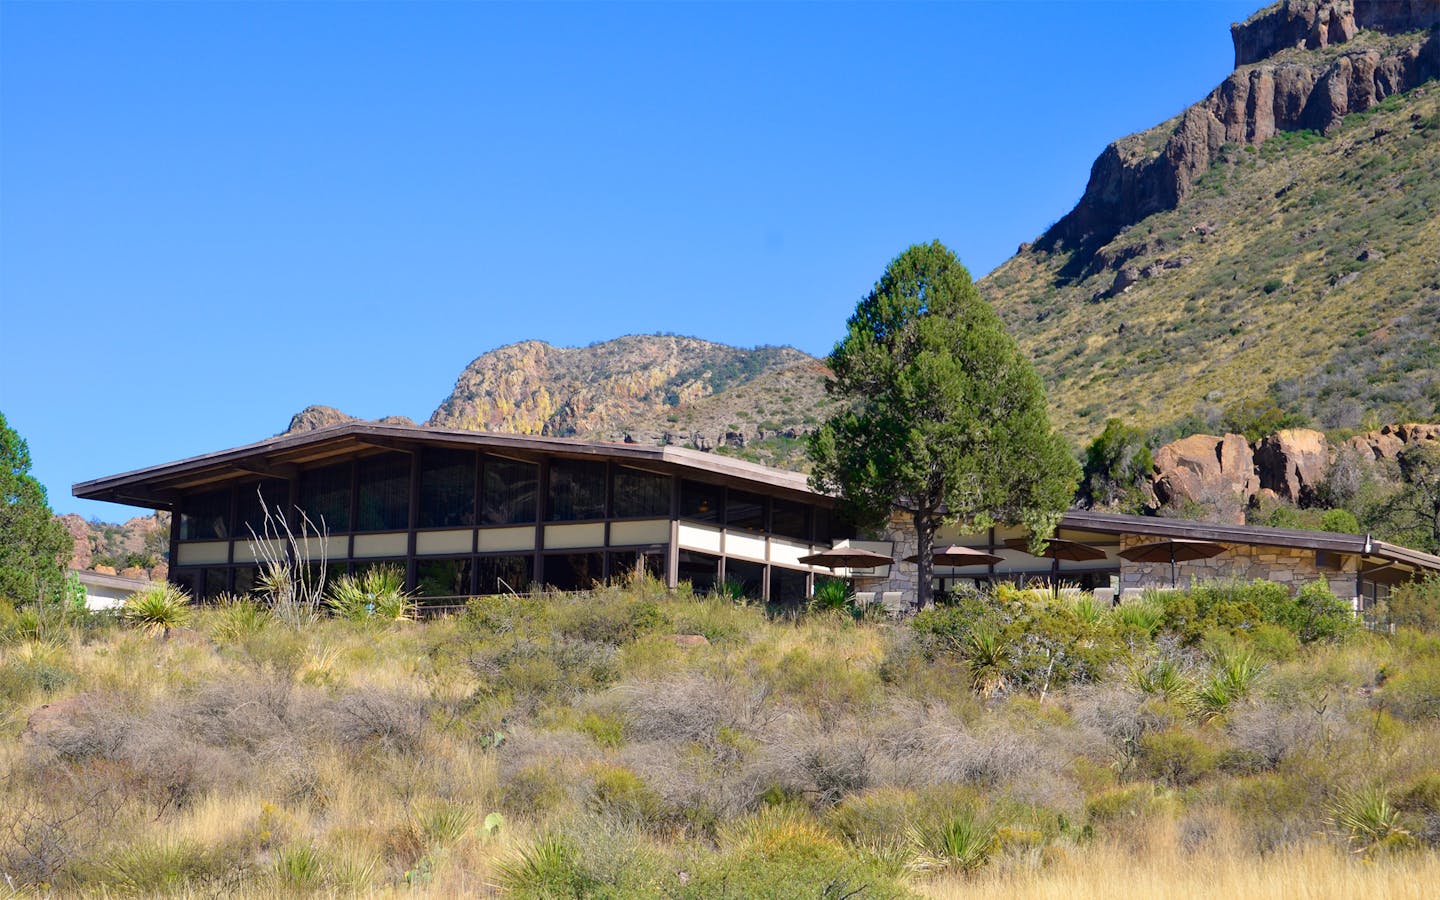 First Look: The $22 Million Makeover of Big Bend's Chisos Mountains Lodge